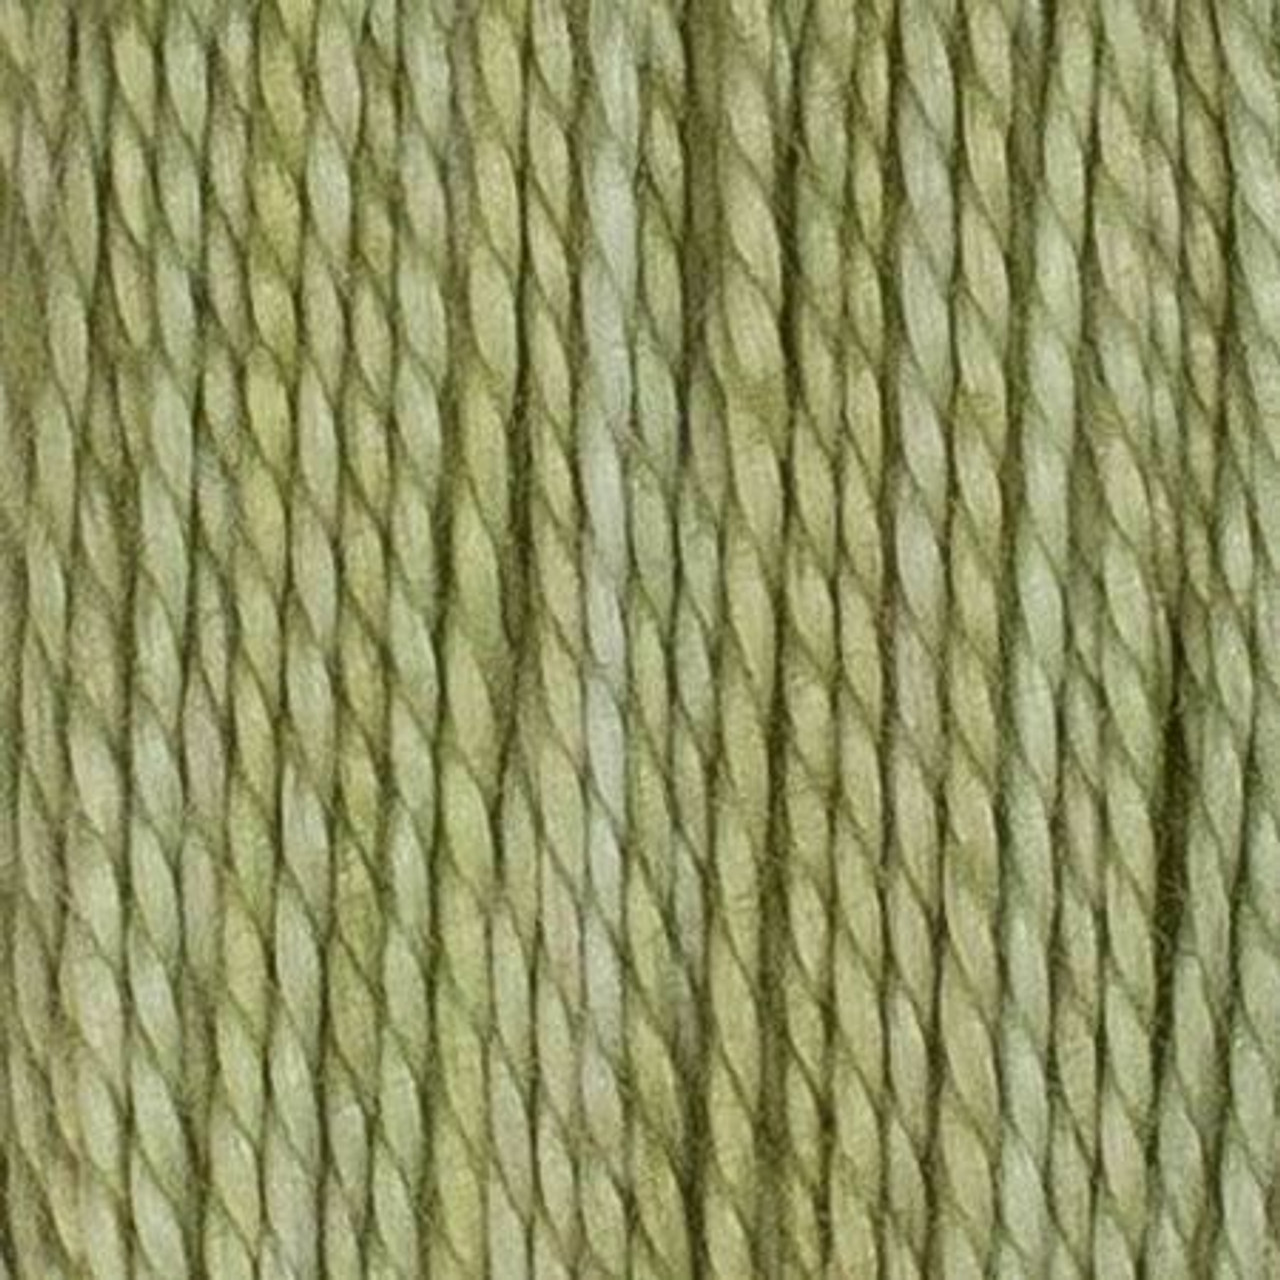 House of Embroidery : 8wt Perle Cotton - Golden Privet (6B)